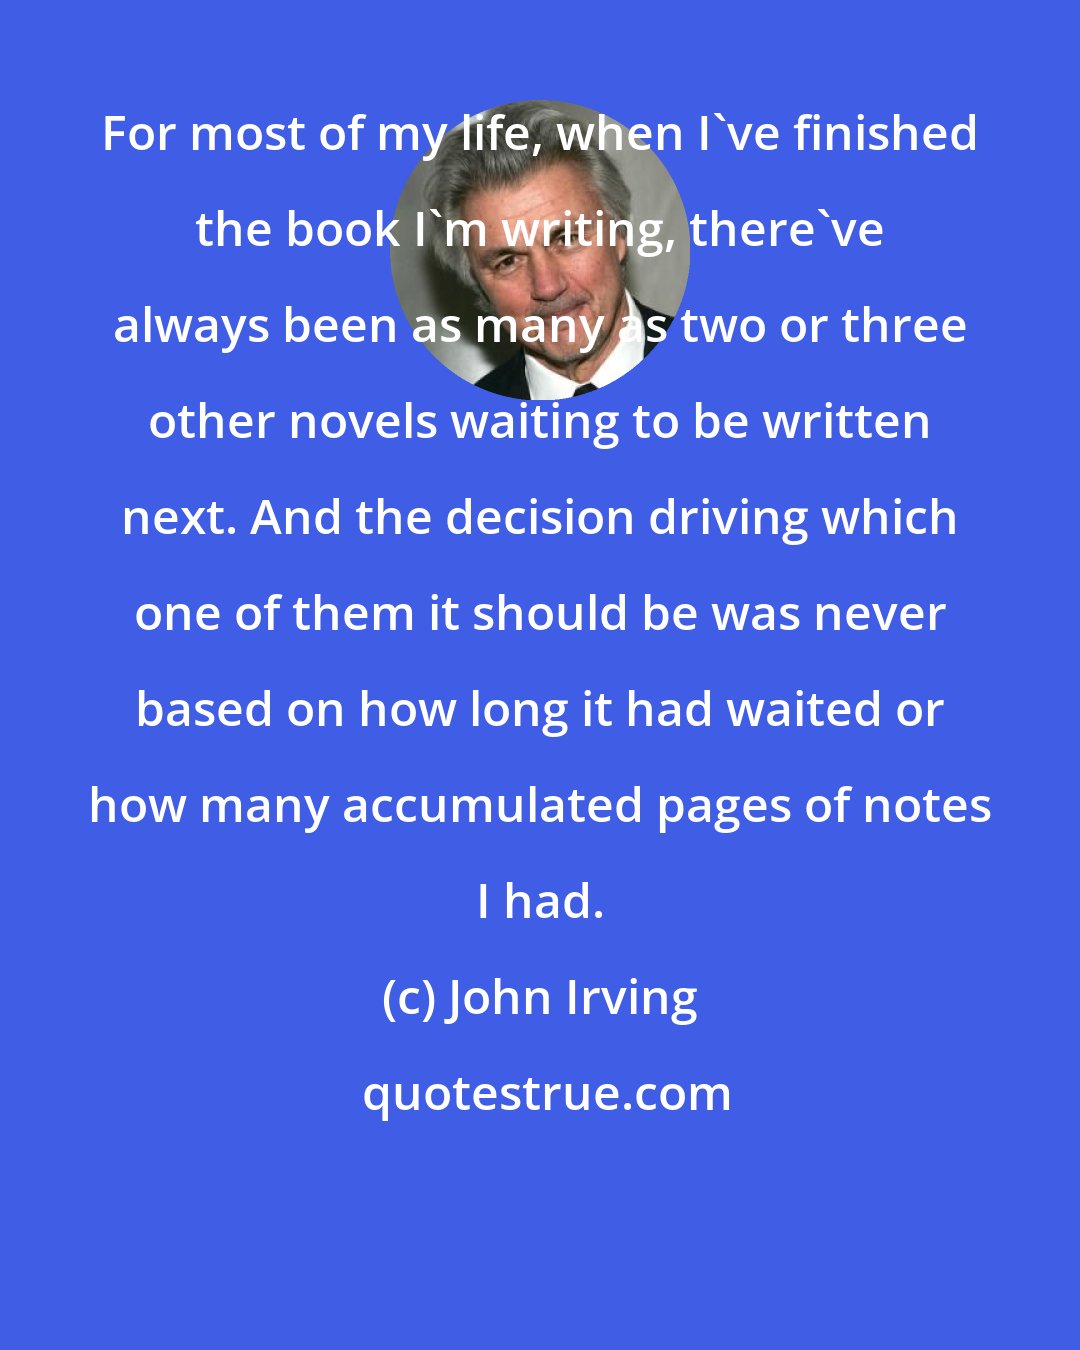 John Irving: For most of my life, when I've finished the book I'm writing, there've always been as many as two or three other novels waiting to be written next. And the decision driving which one of them it should be was never based on how long it had waited or how many accumulated pages of notes I had.